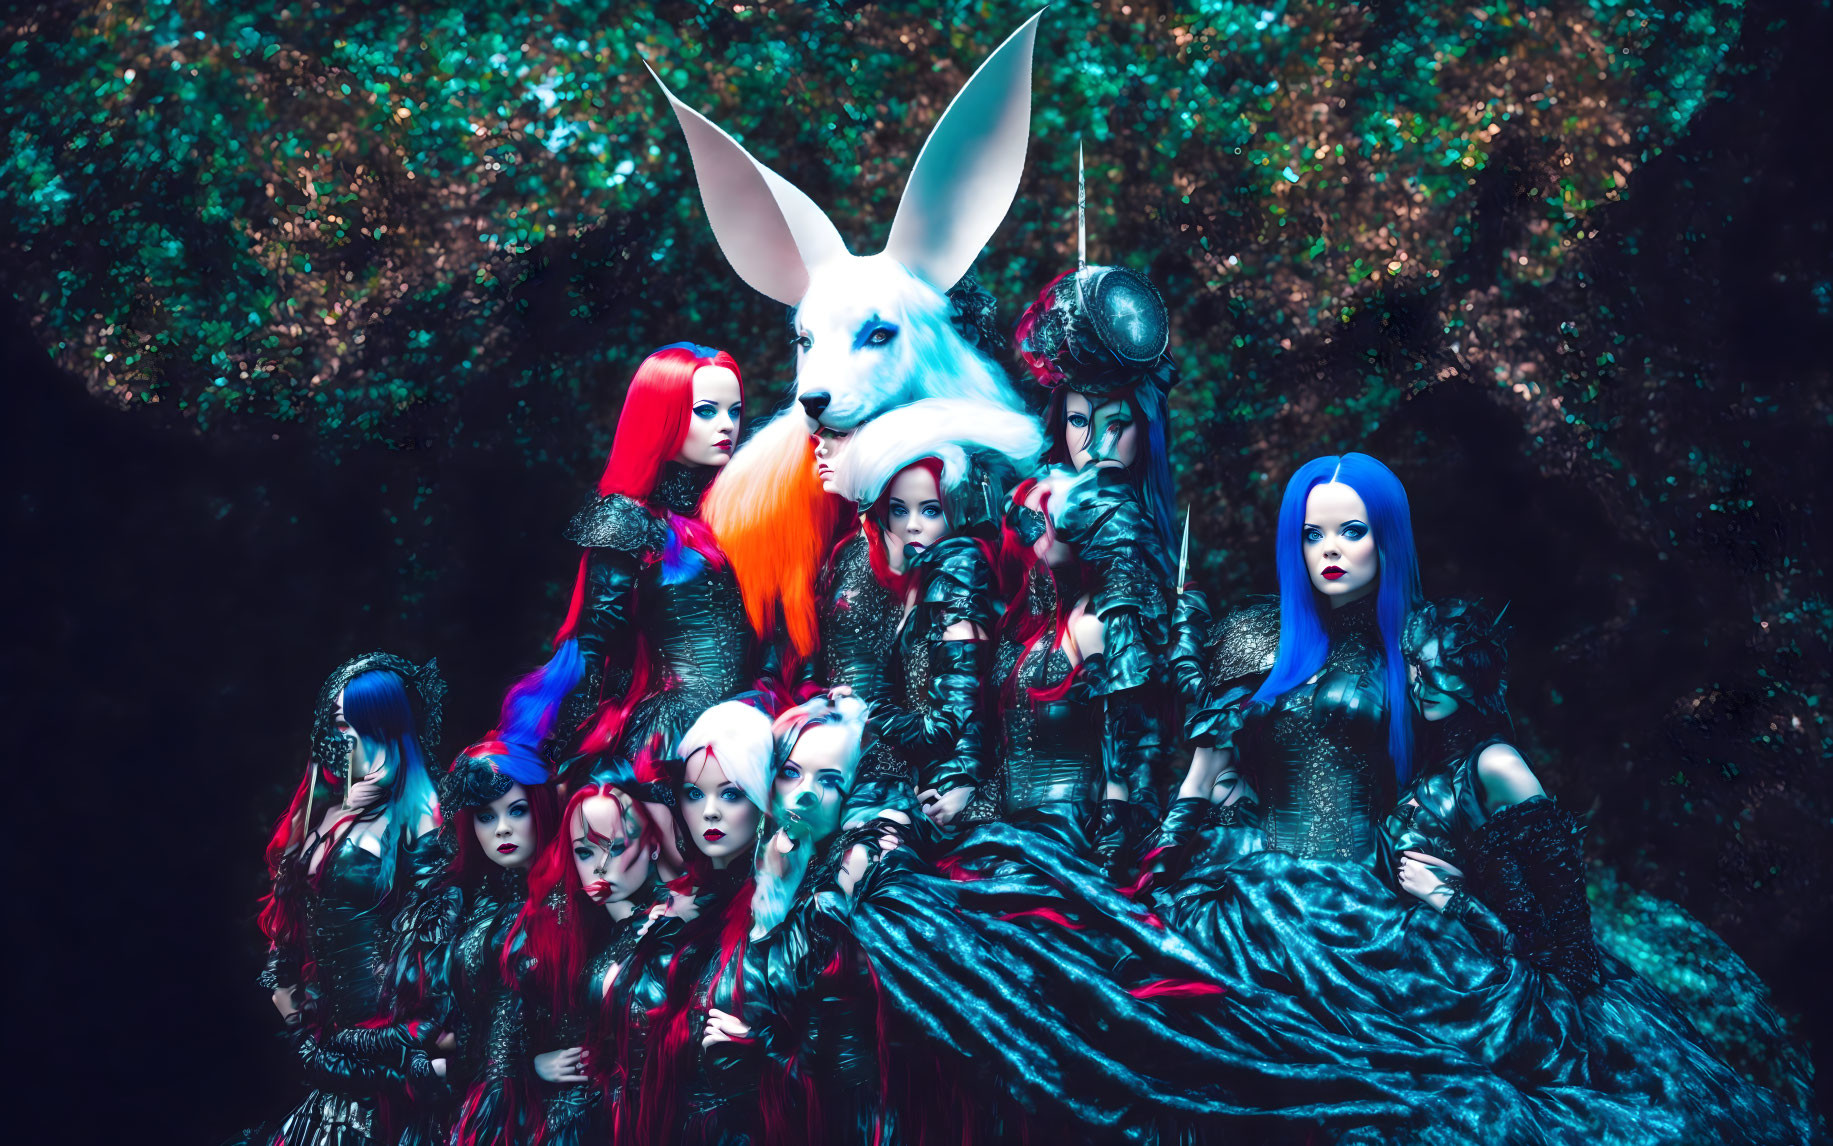 Colorful individuals in metallic costumes pose with white rabbit in forest.